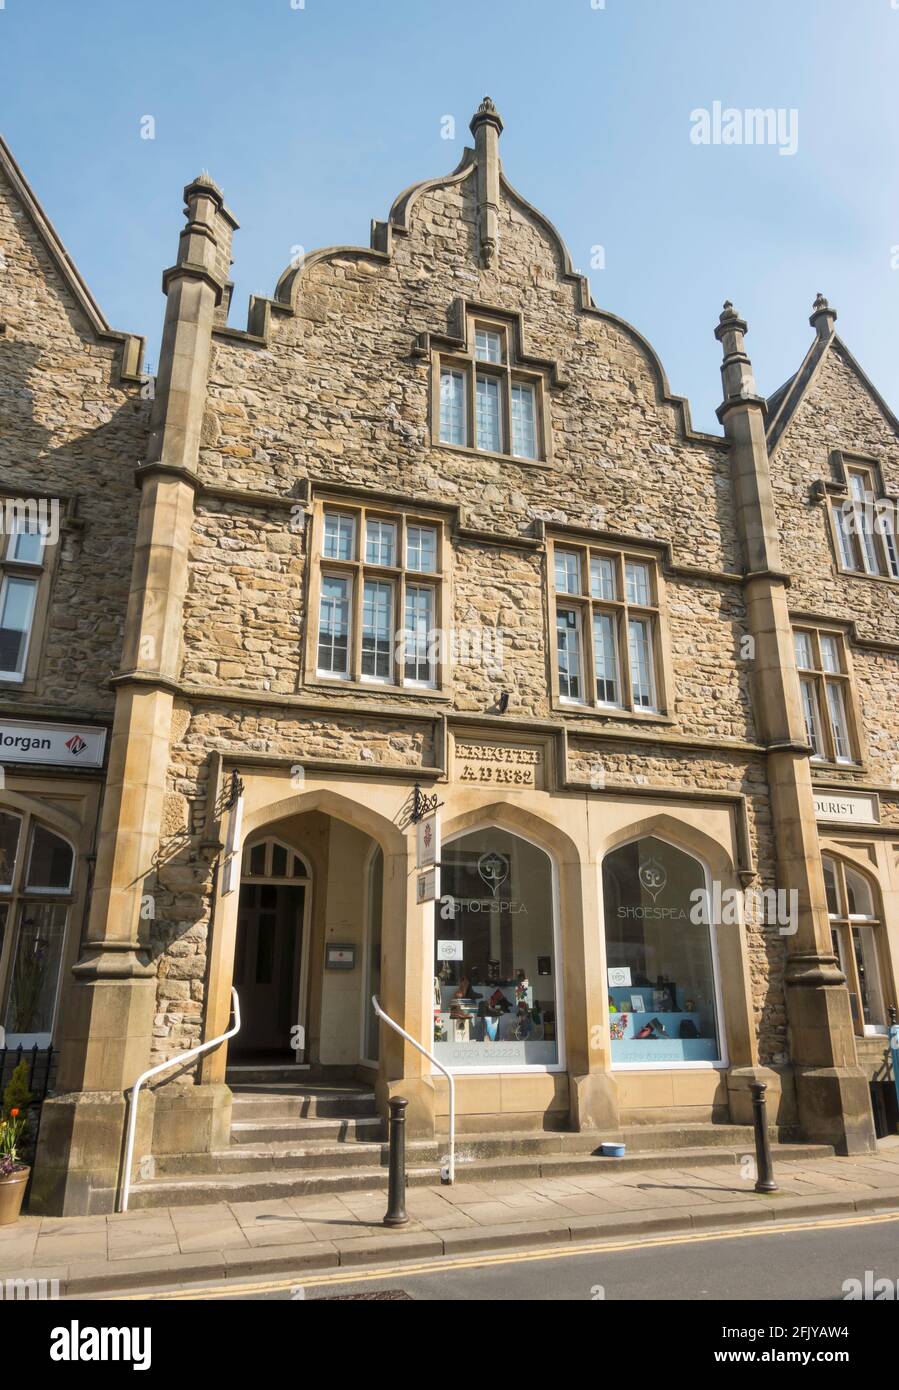 The town hall building in Settle, Yorkshire, England, UK Stock Photo